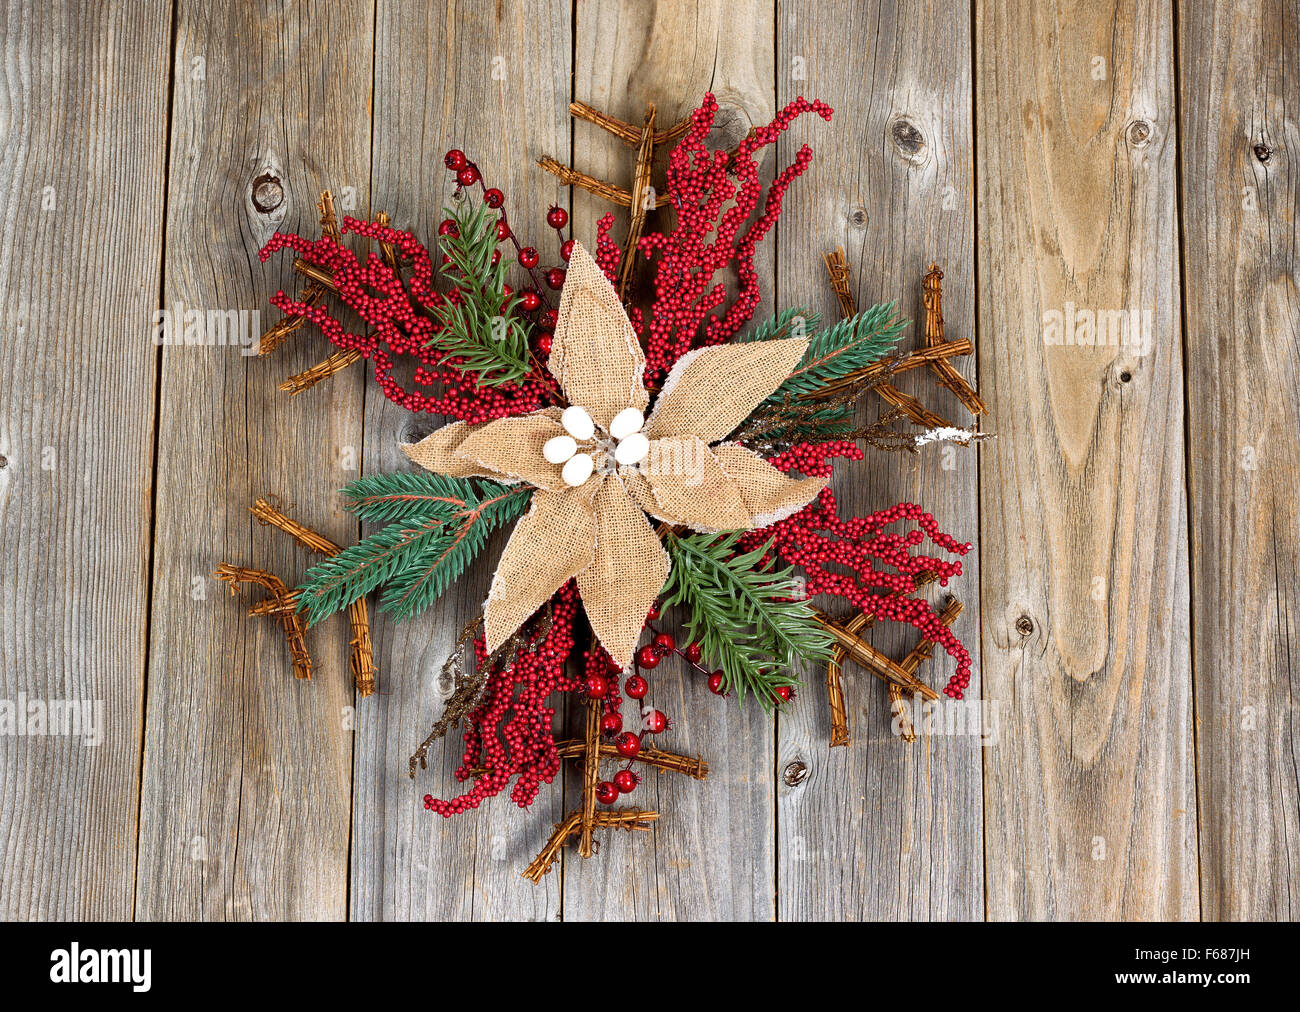 Holiday wreath, cloth flower in center, on rustic wood. Layout in horizontal format. Stock Photo